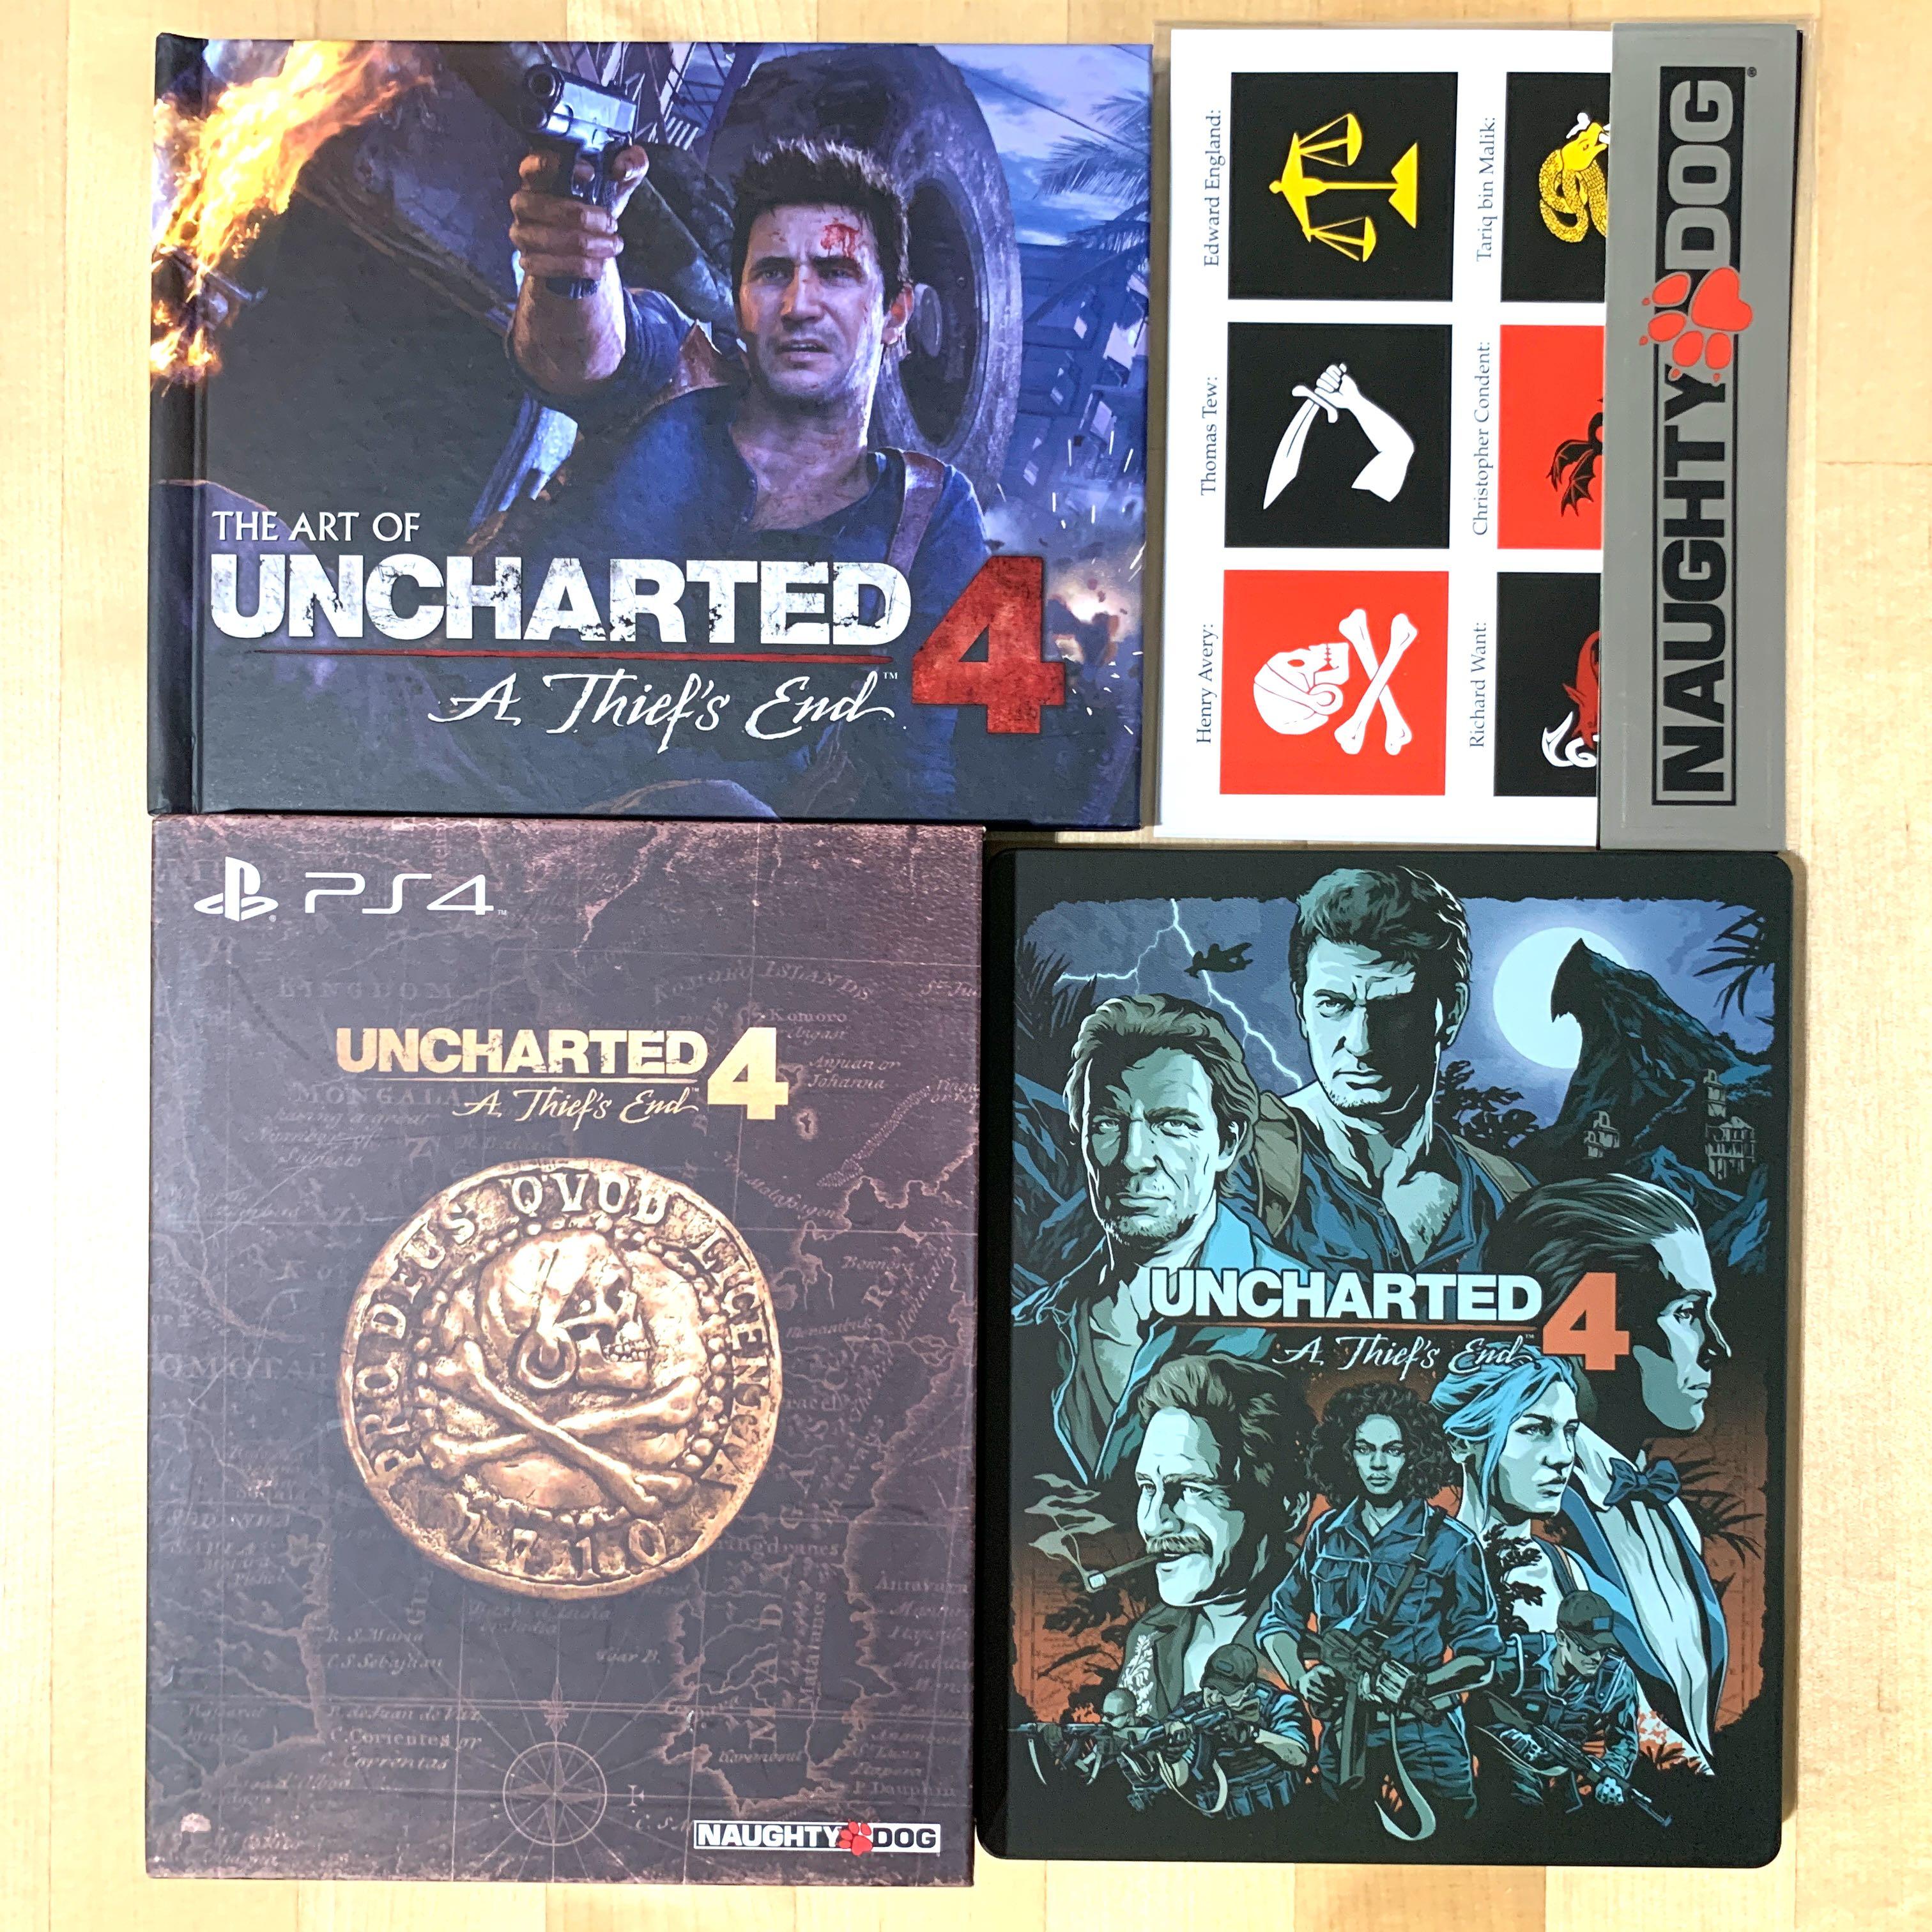 uncharted 4 a thief's end collector's edition